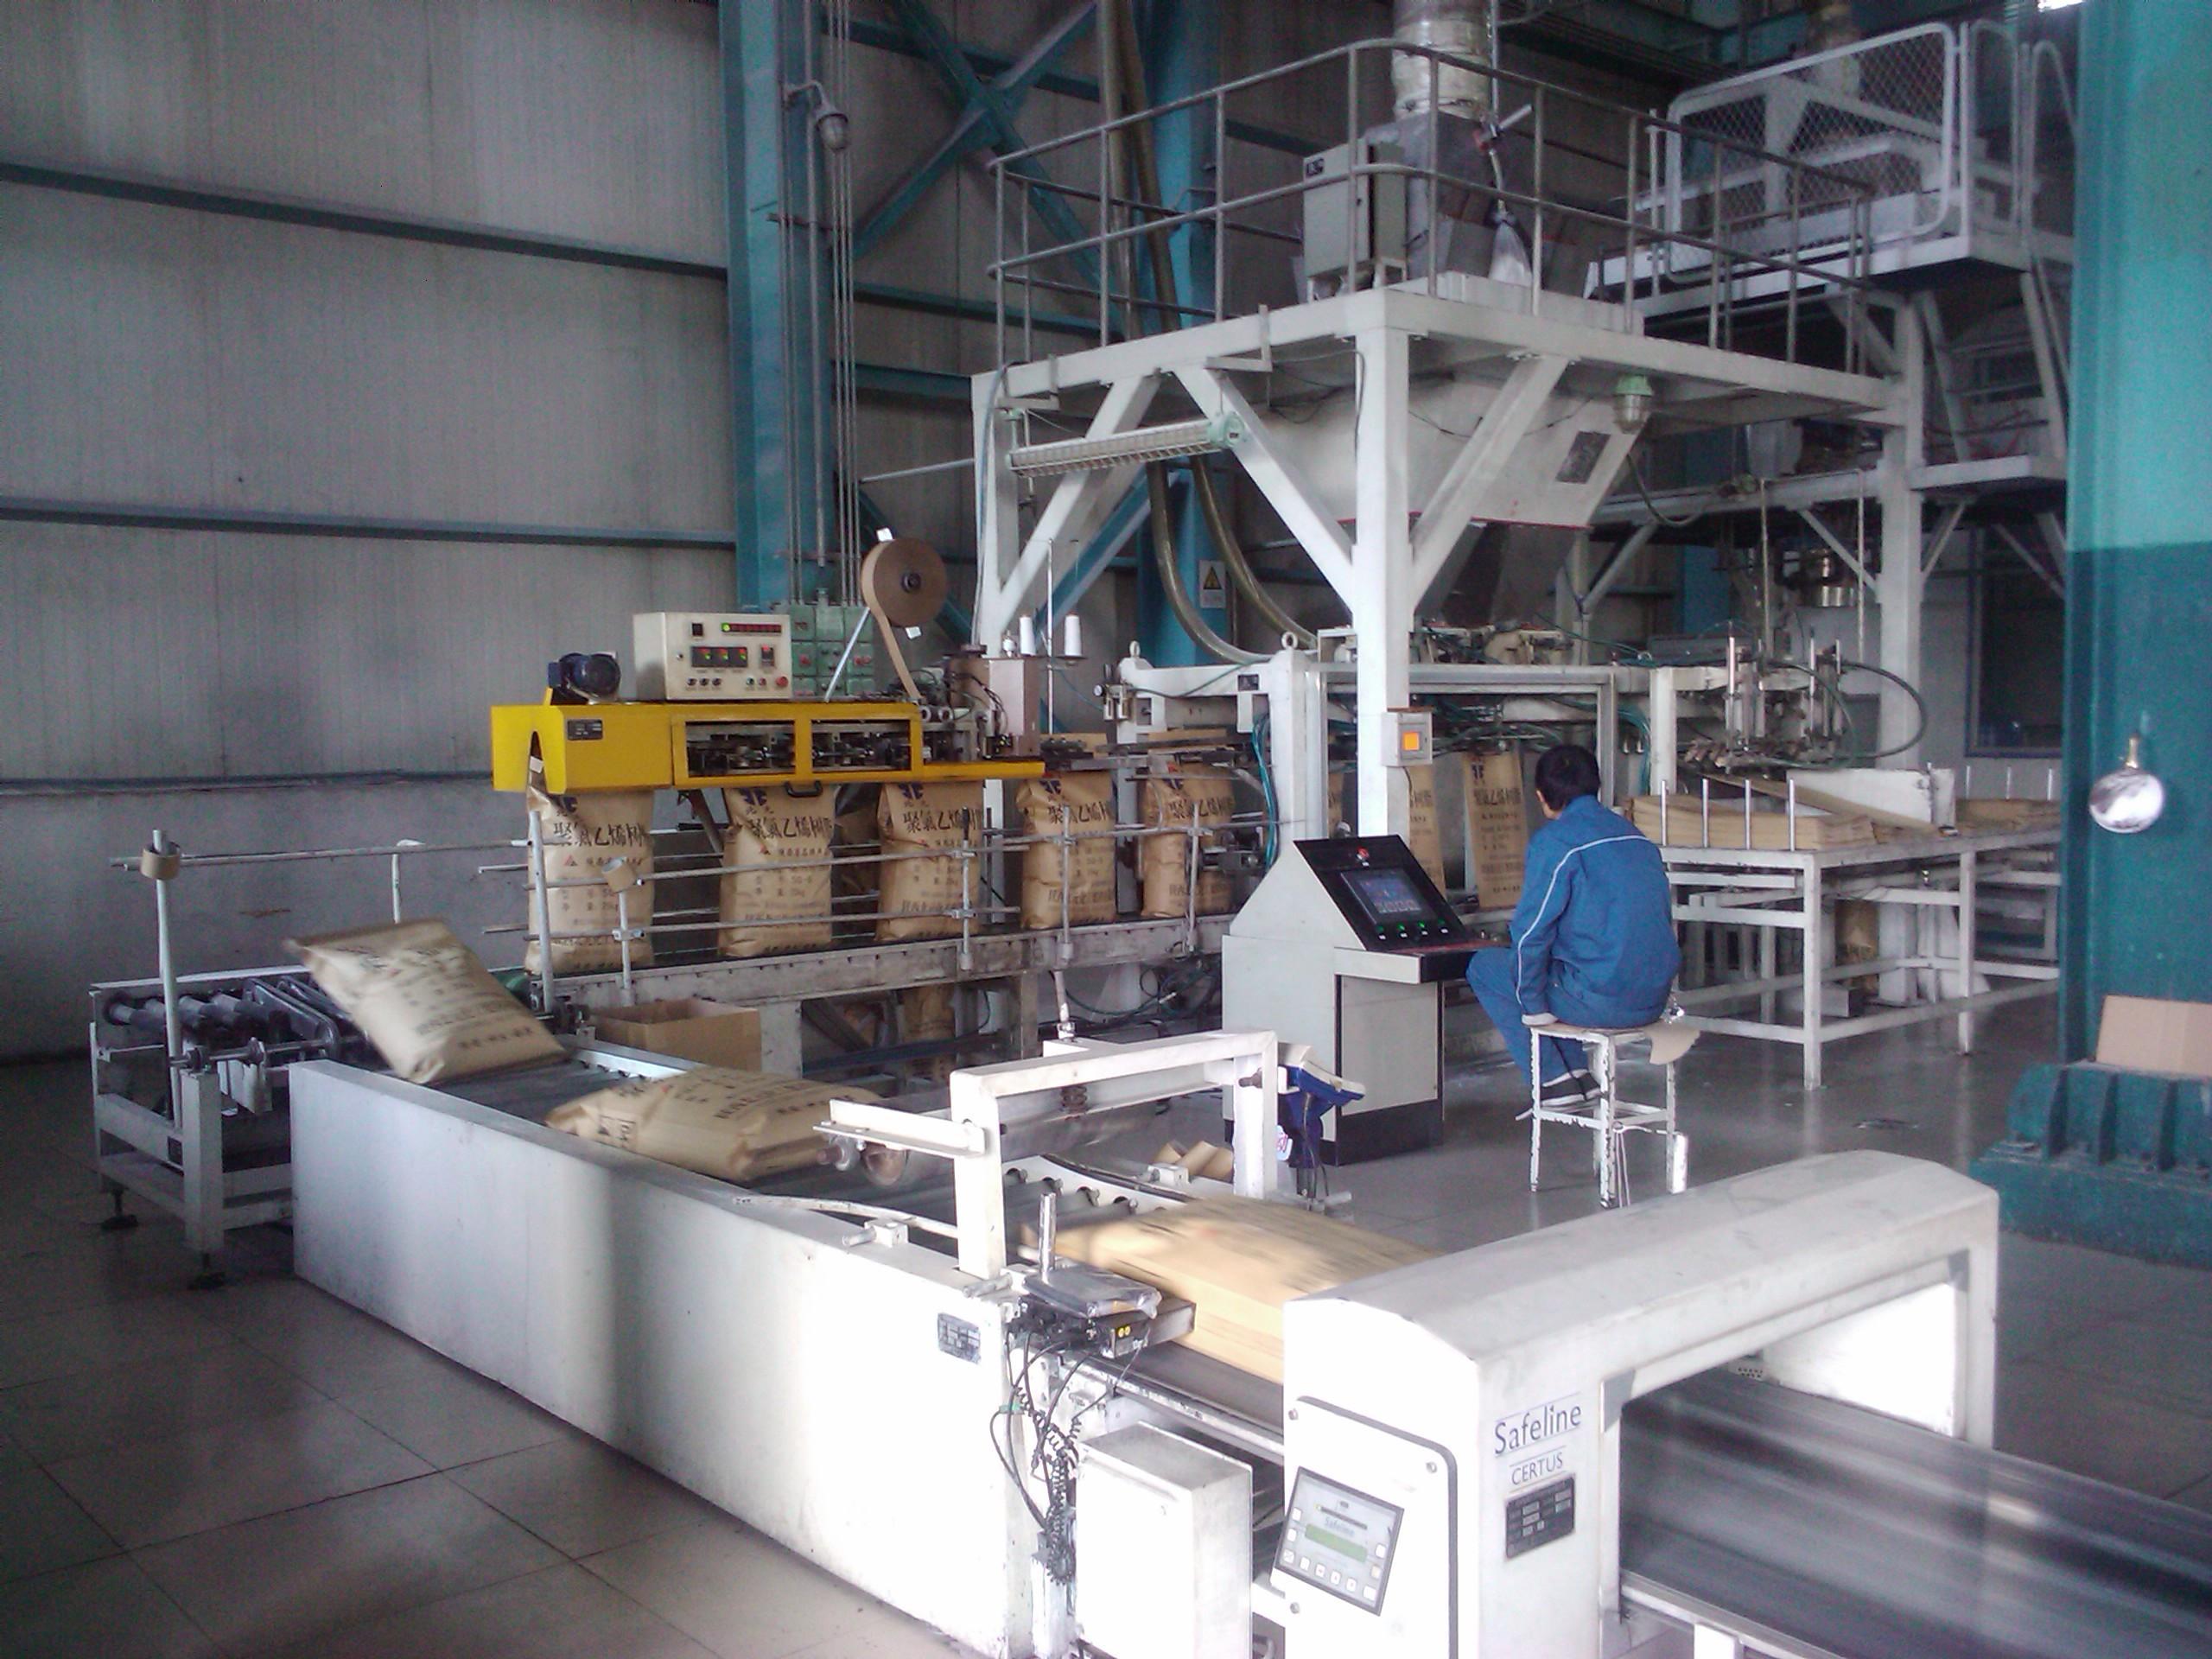 Automatic Paper Bag Packaging Line 25kg Automatic Packing and Sealing Machine Fully Automatic Weight Packing By Jumbo Bag PP Packing 1200 – 1600kg and 25kg Bag Feed Mill 1 Bagging Line automatic bagge